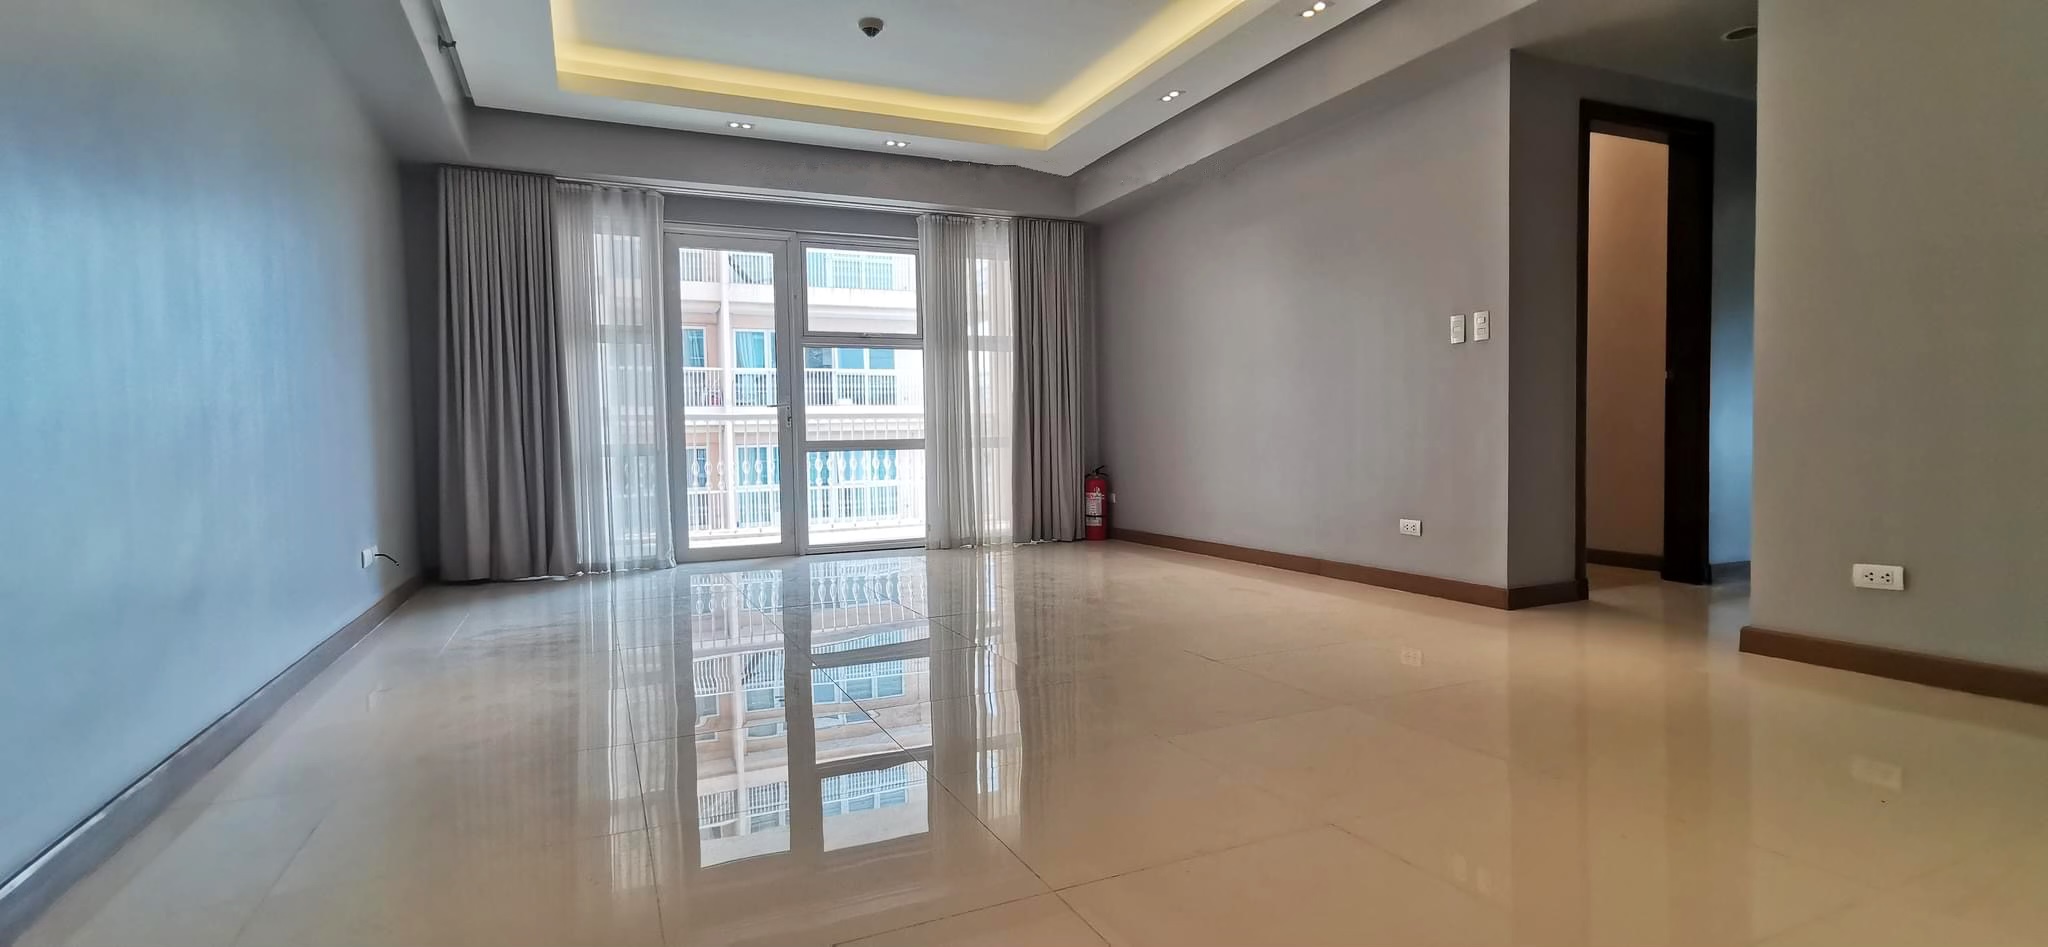 Venice Luxury Residences, Mckinley Hill, BGC, Taguig – 3 bedroom for Sale‼️